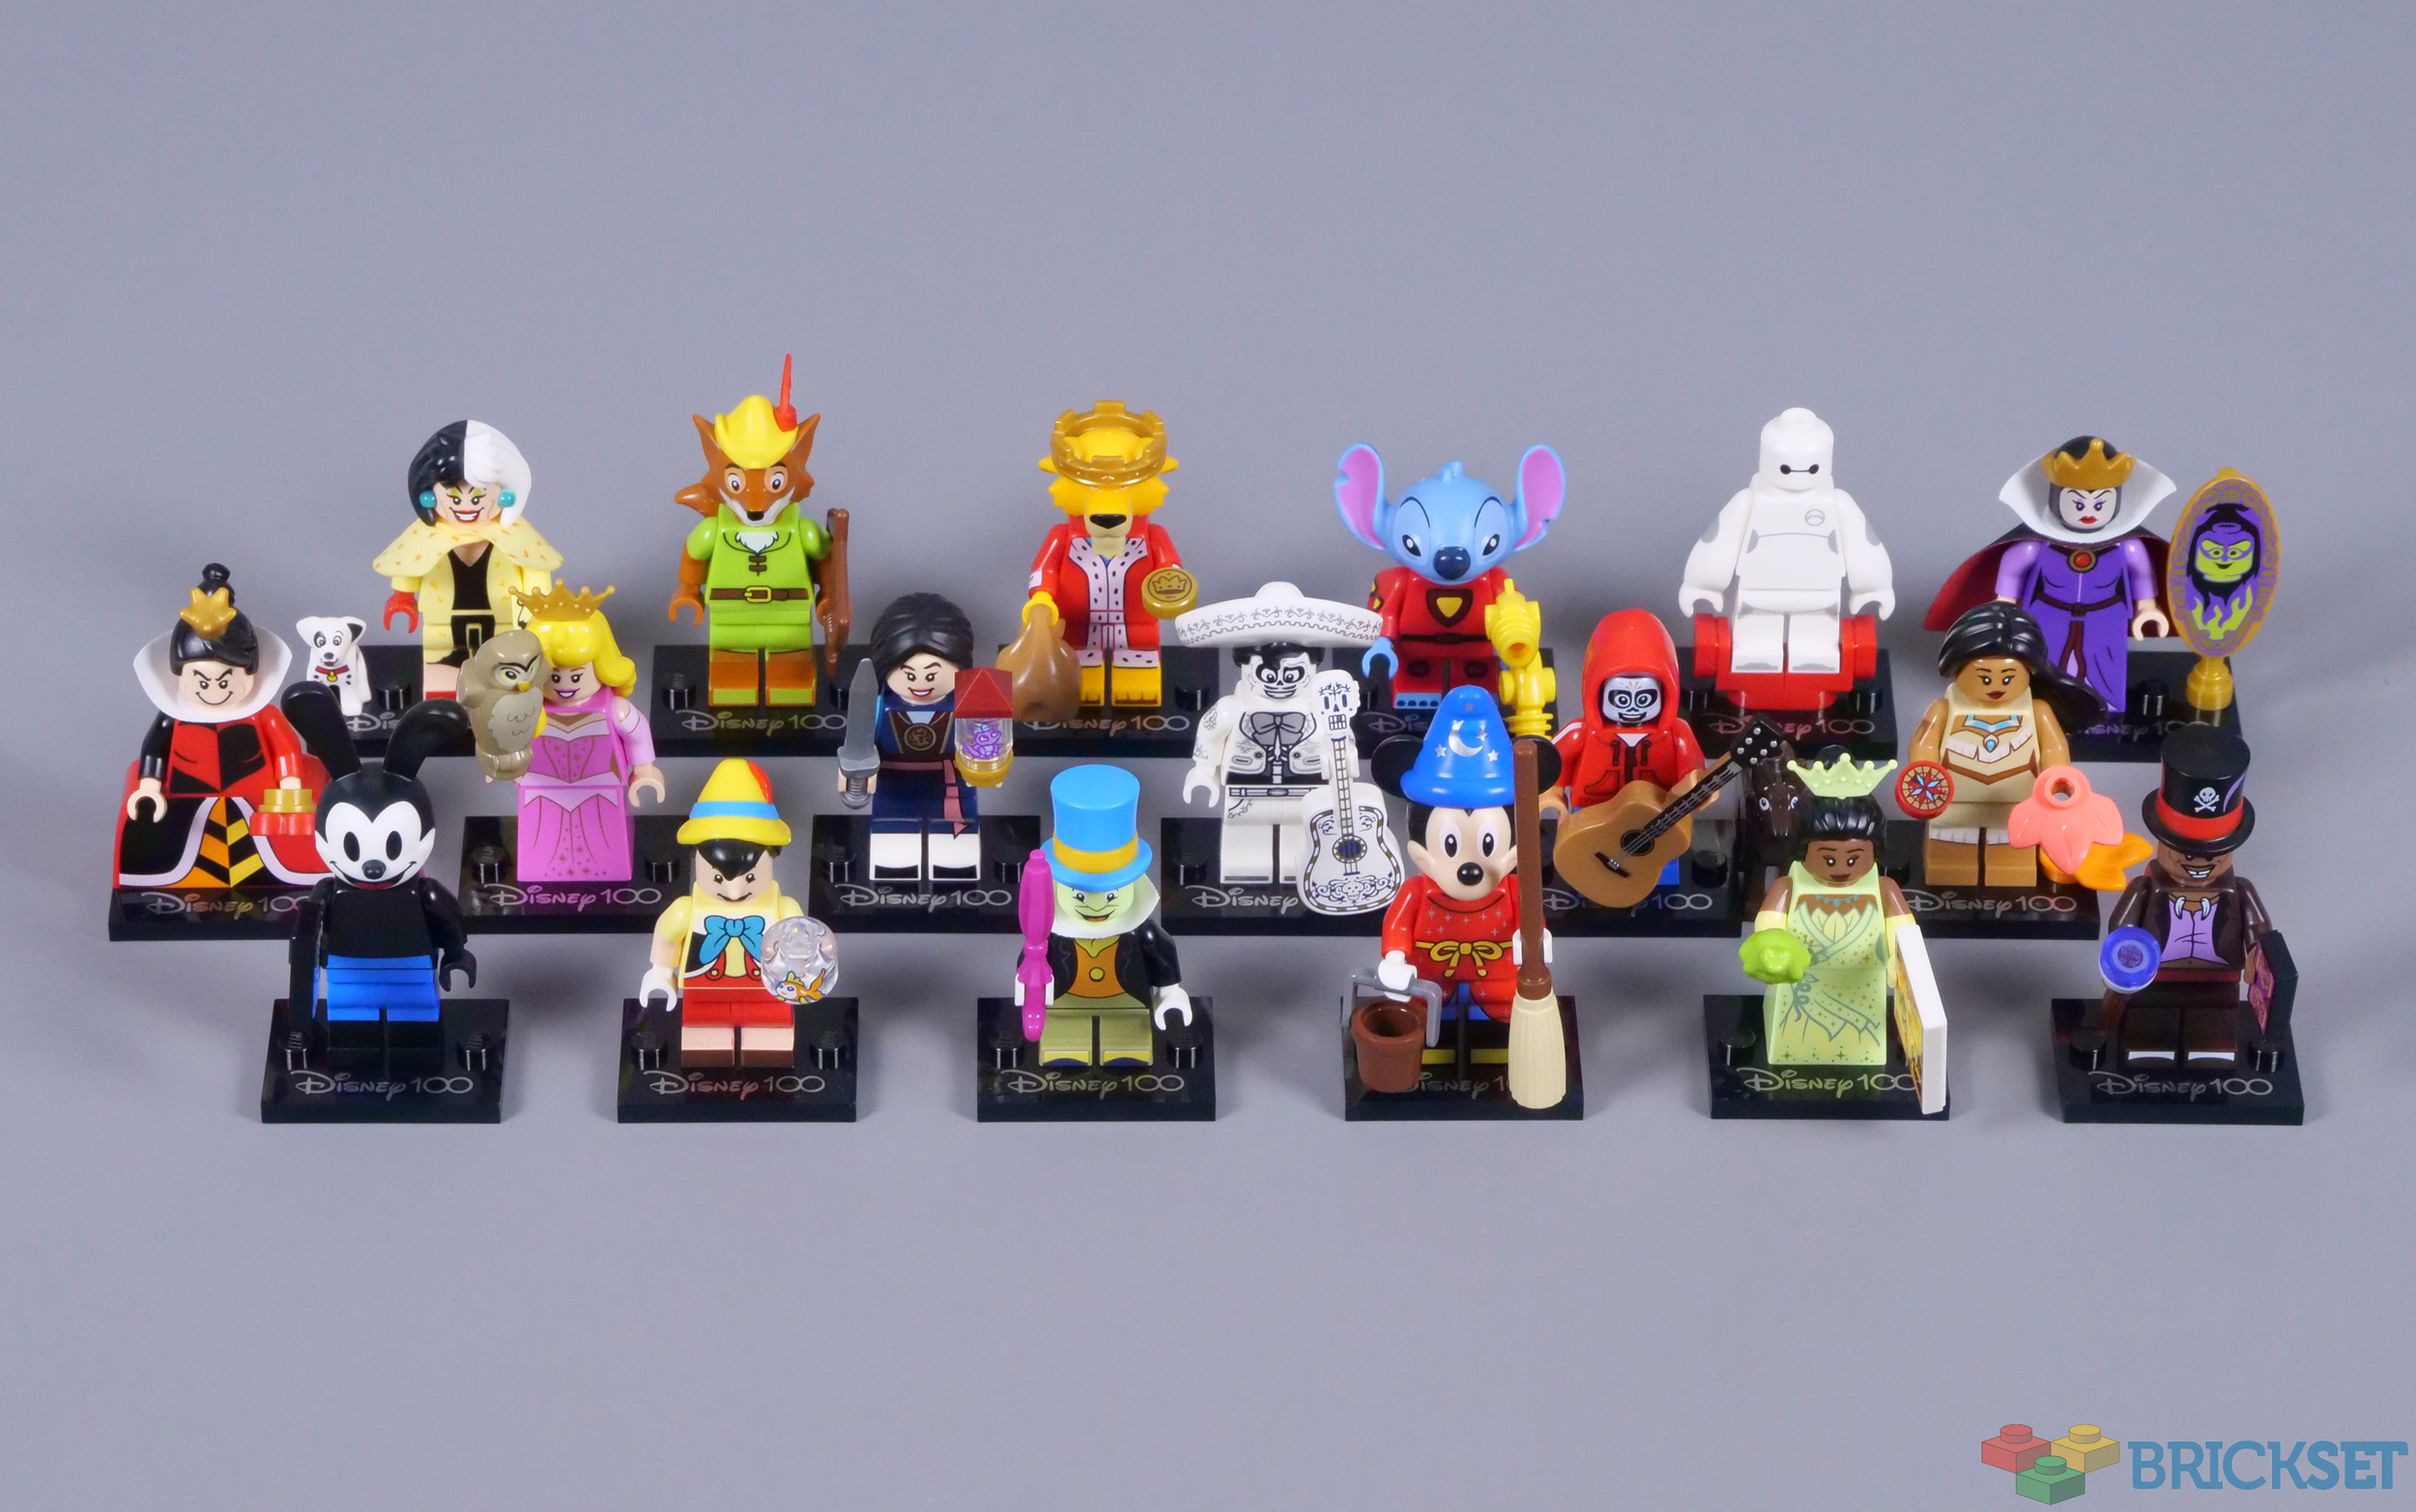 Disney 100 LEGO Villain Icons and Disney Duos Sets Are Up for Pre